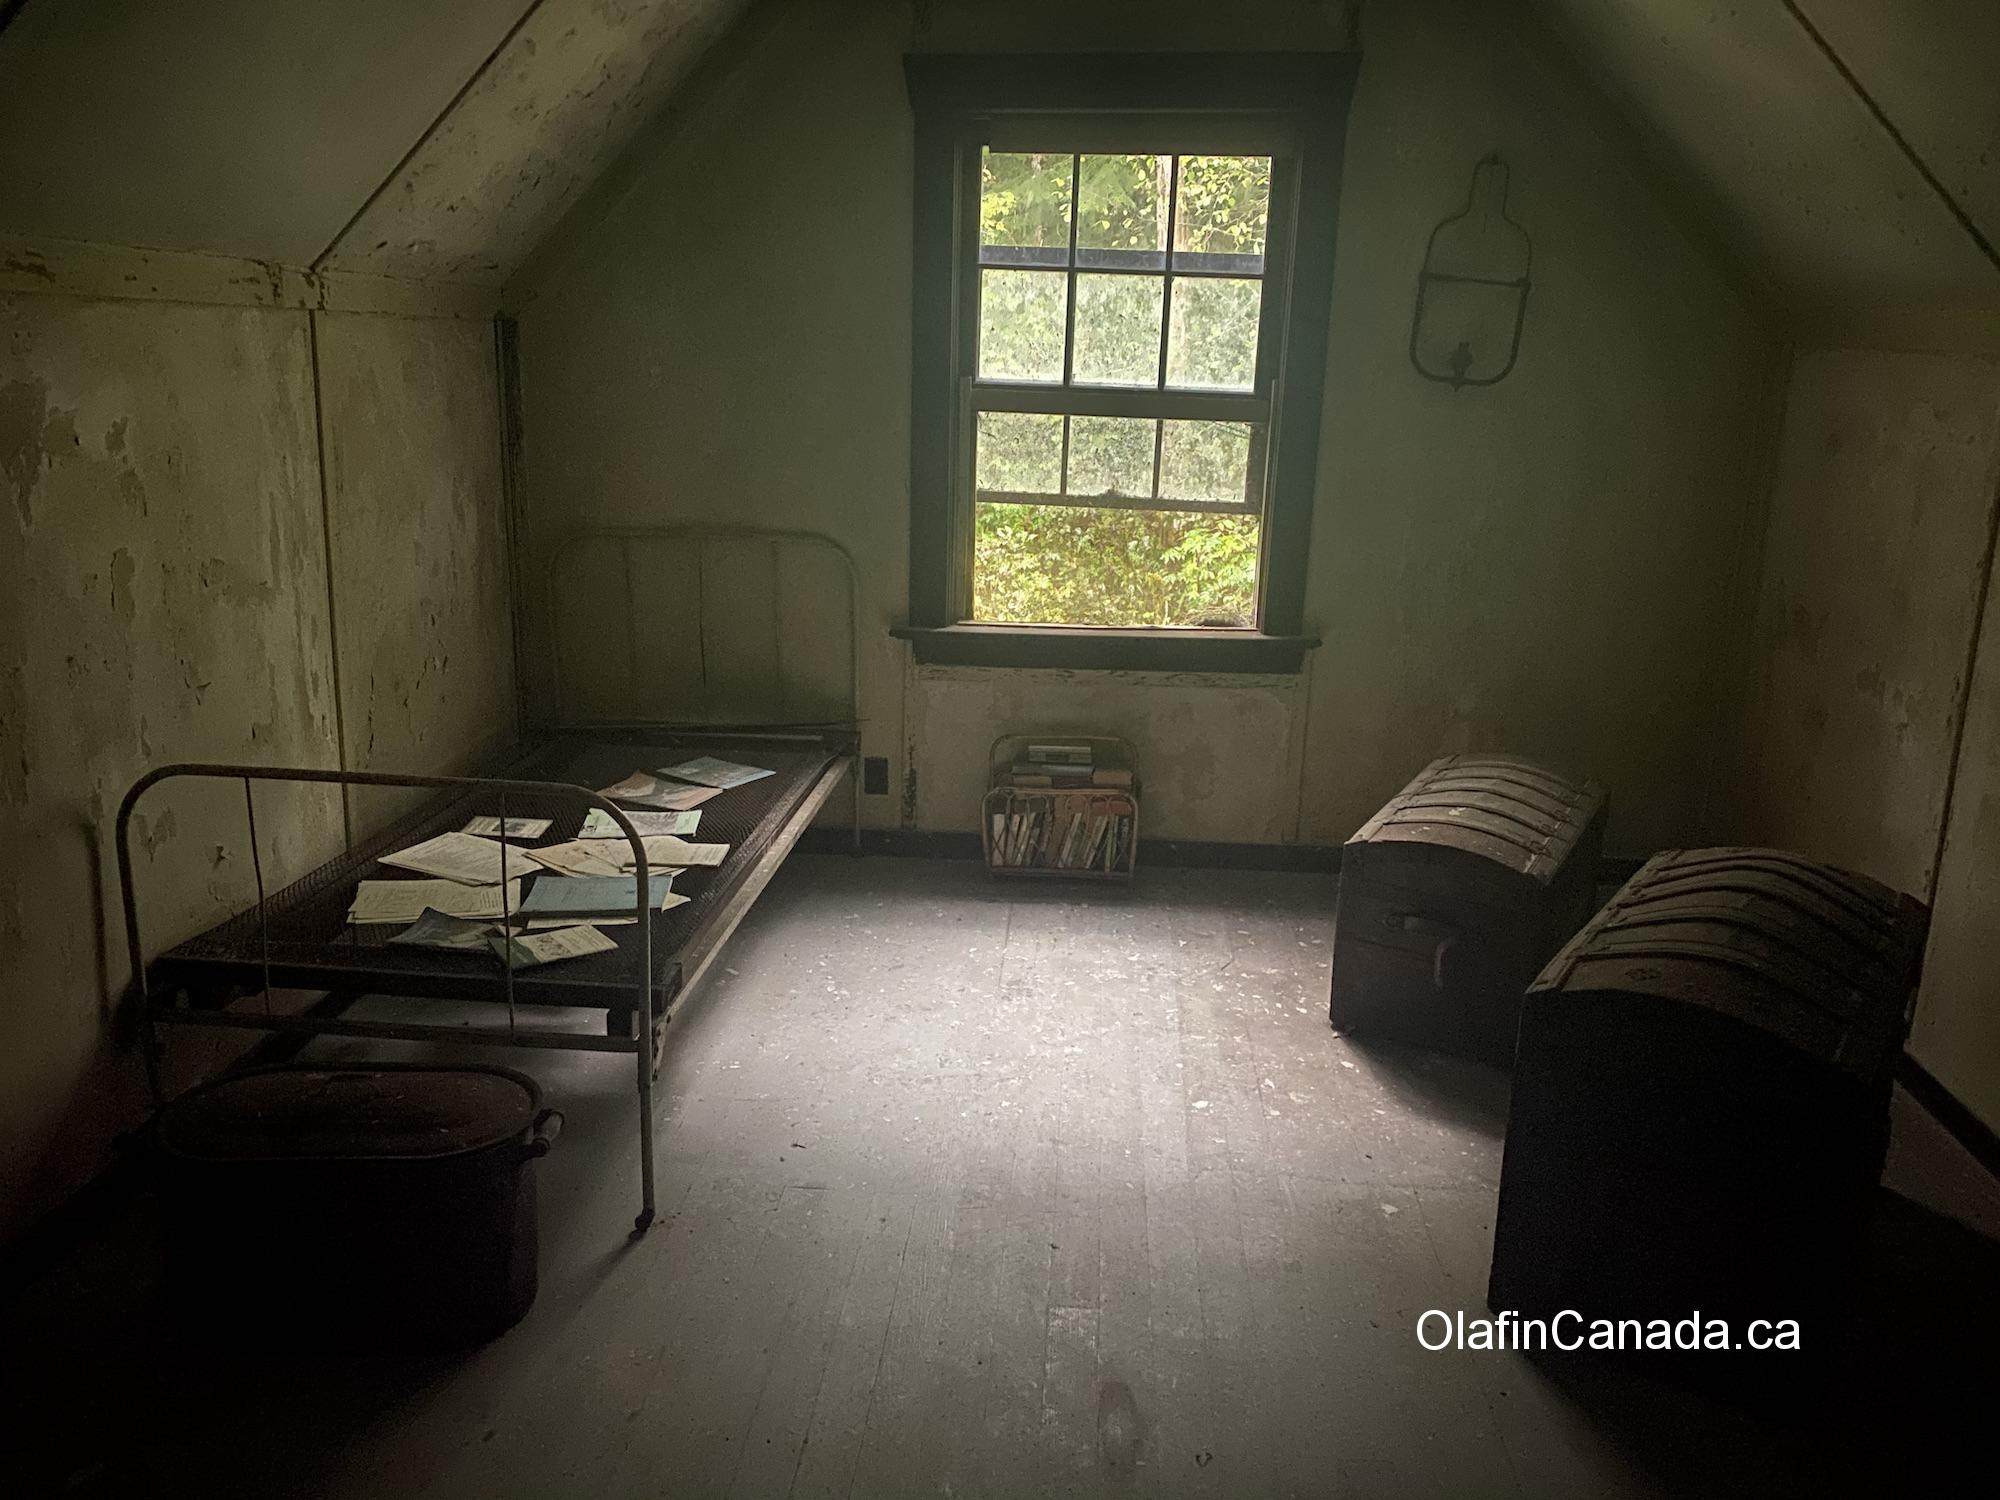 Bedroom of the teacher on the first floor of the school in Alice Arm. #olafincanada #britishcolumbia #discoverbc #abandonedbc #alicearm